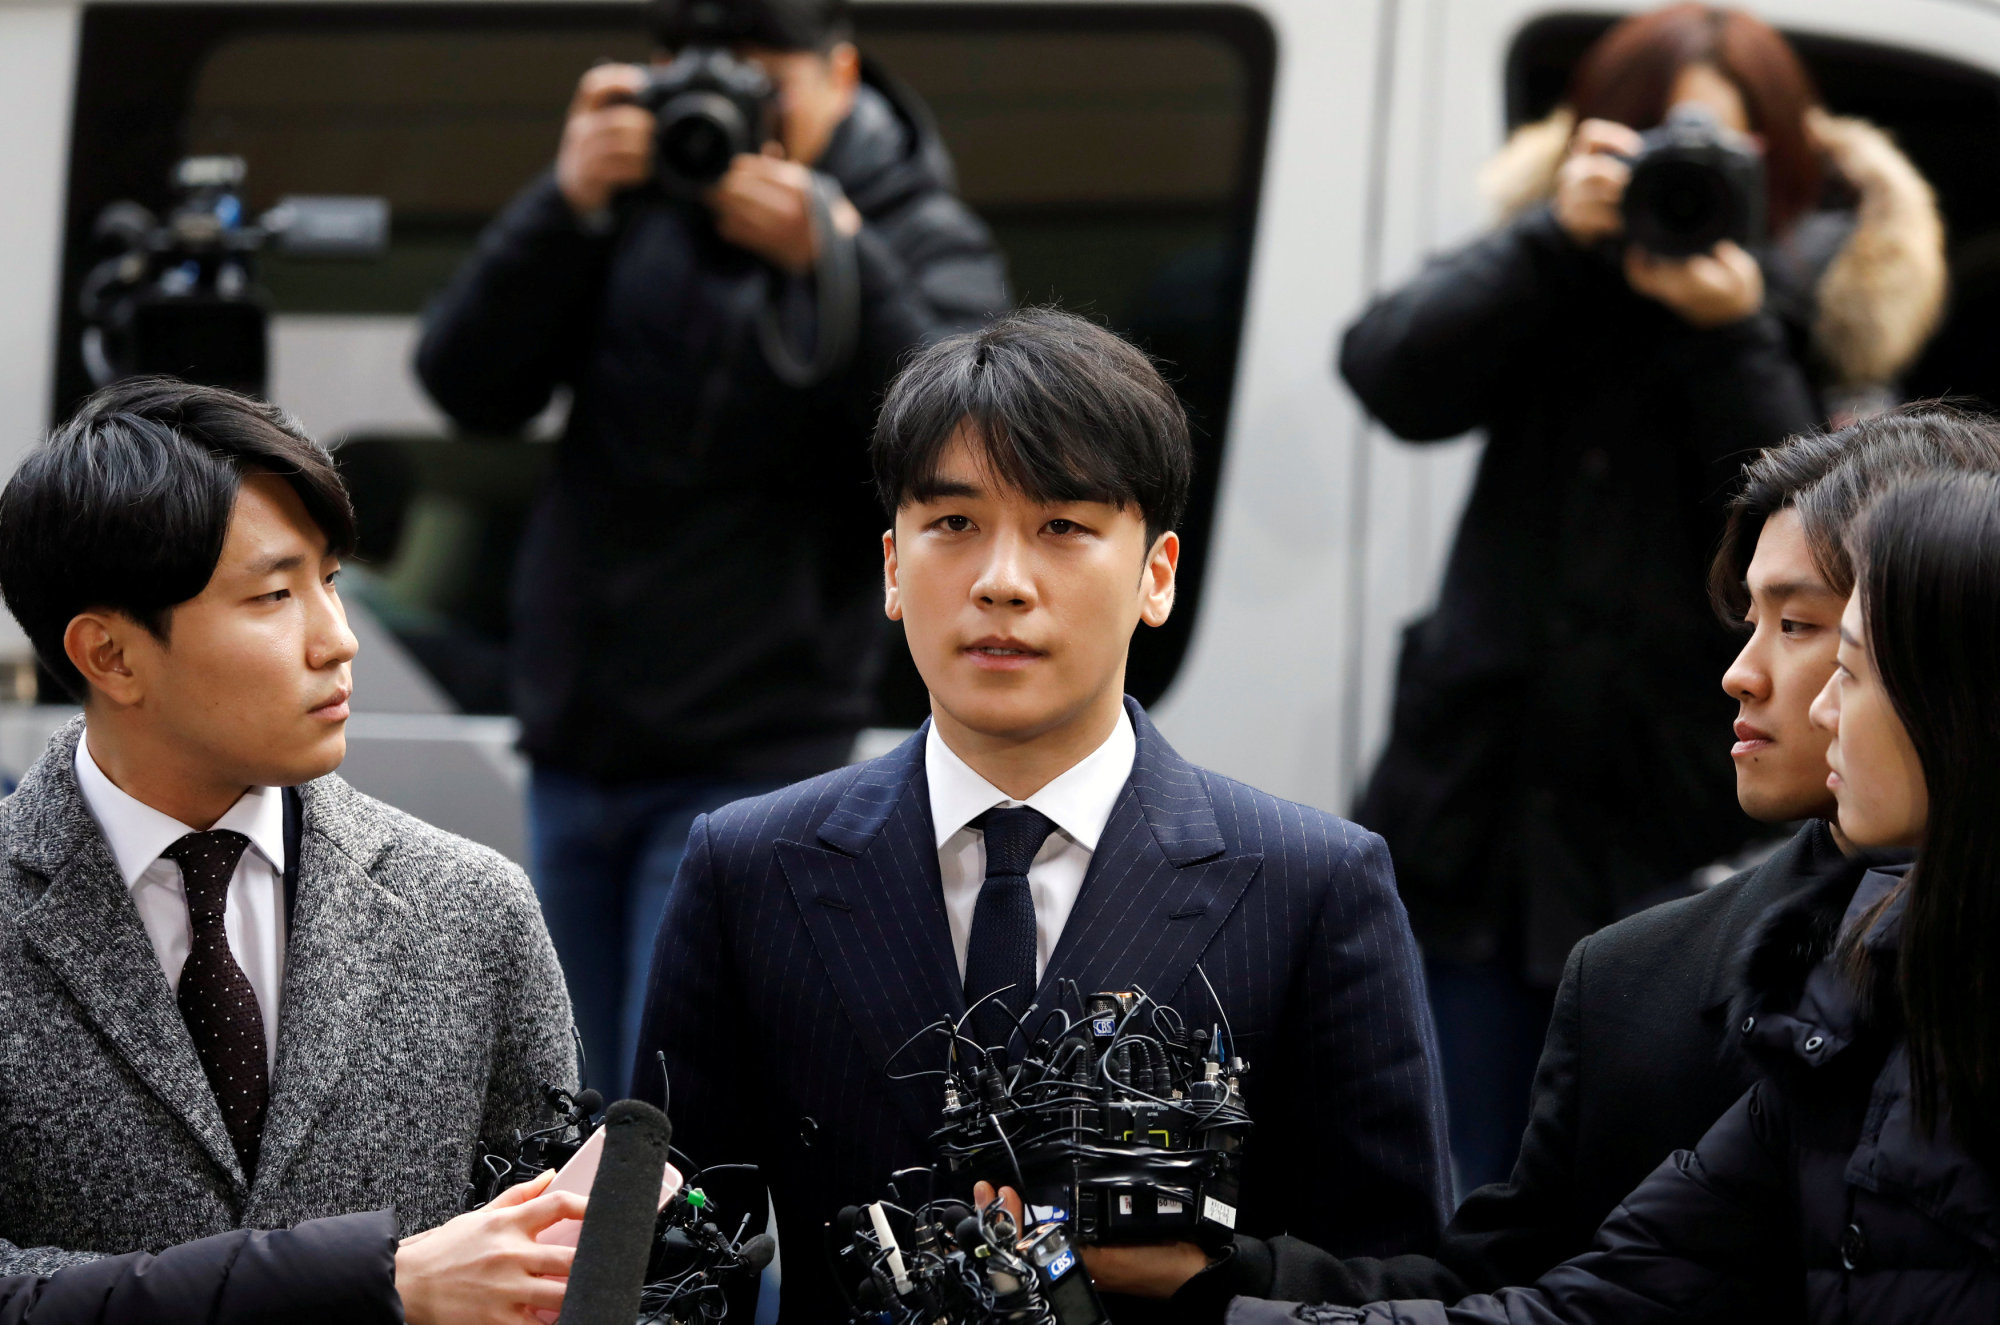 Japanese Rape Xvideo - Sex, lies and video: Scandals rock K-pop world - The Japan Times